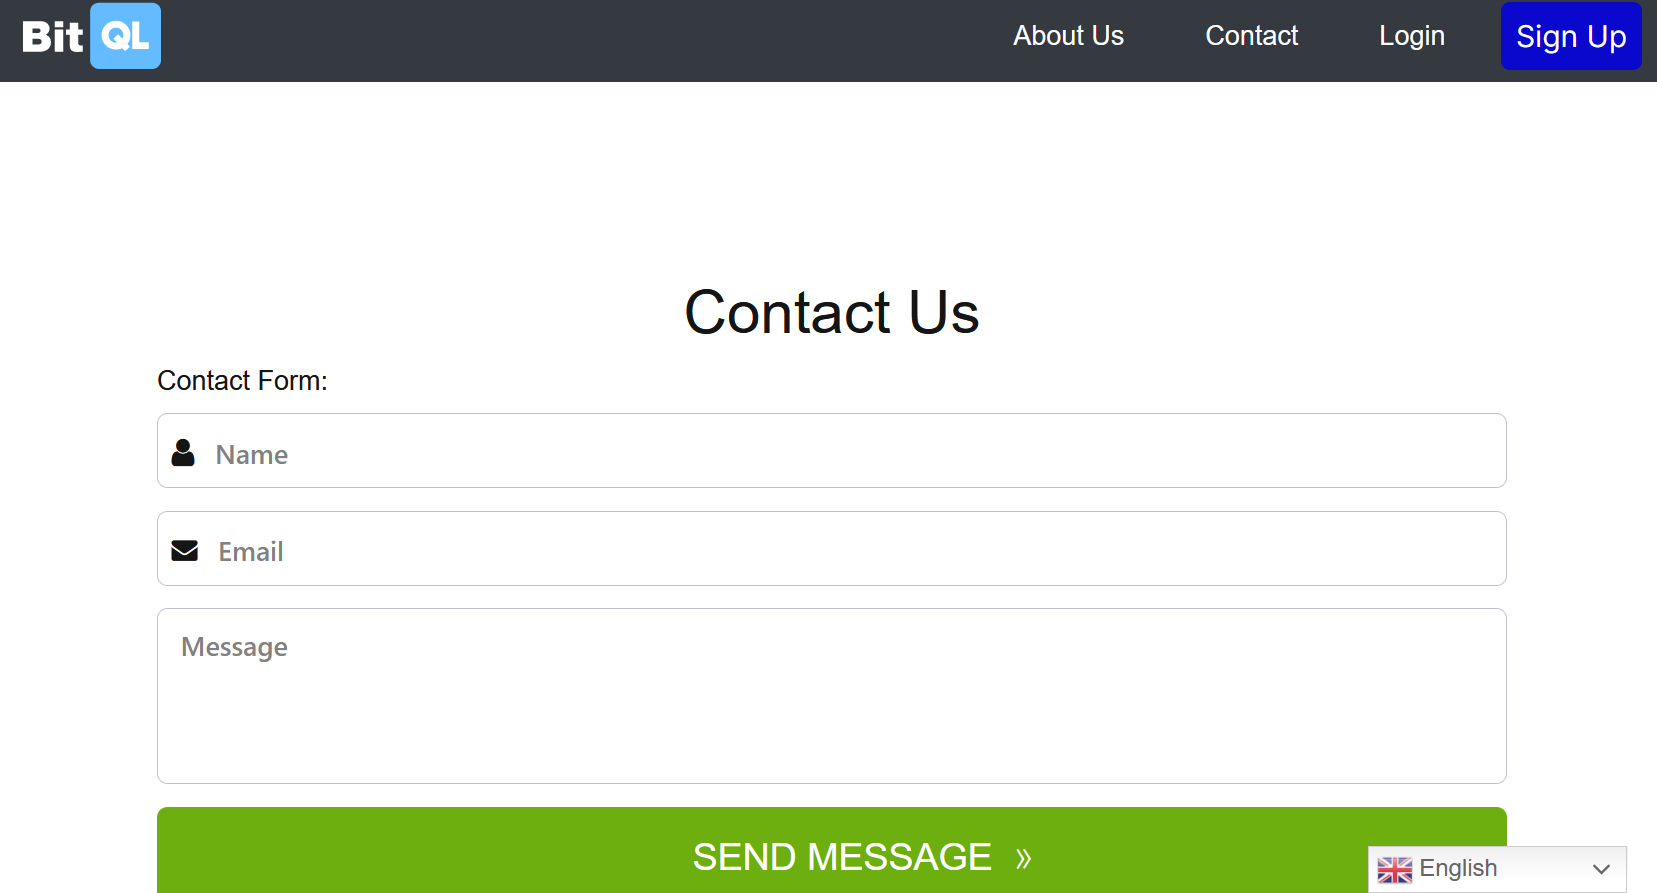 BitQL Contact Page